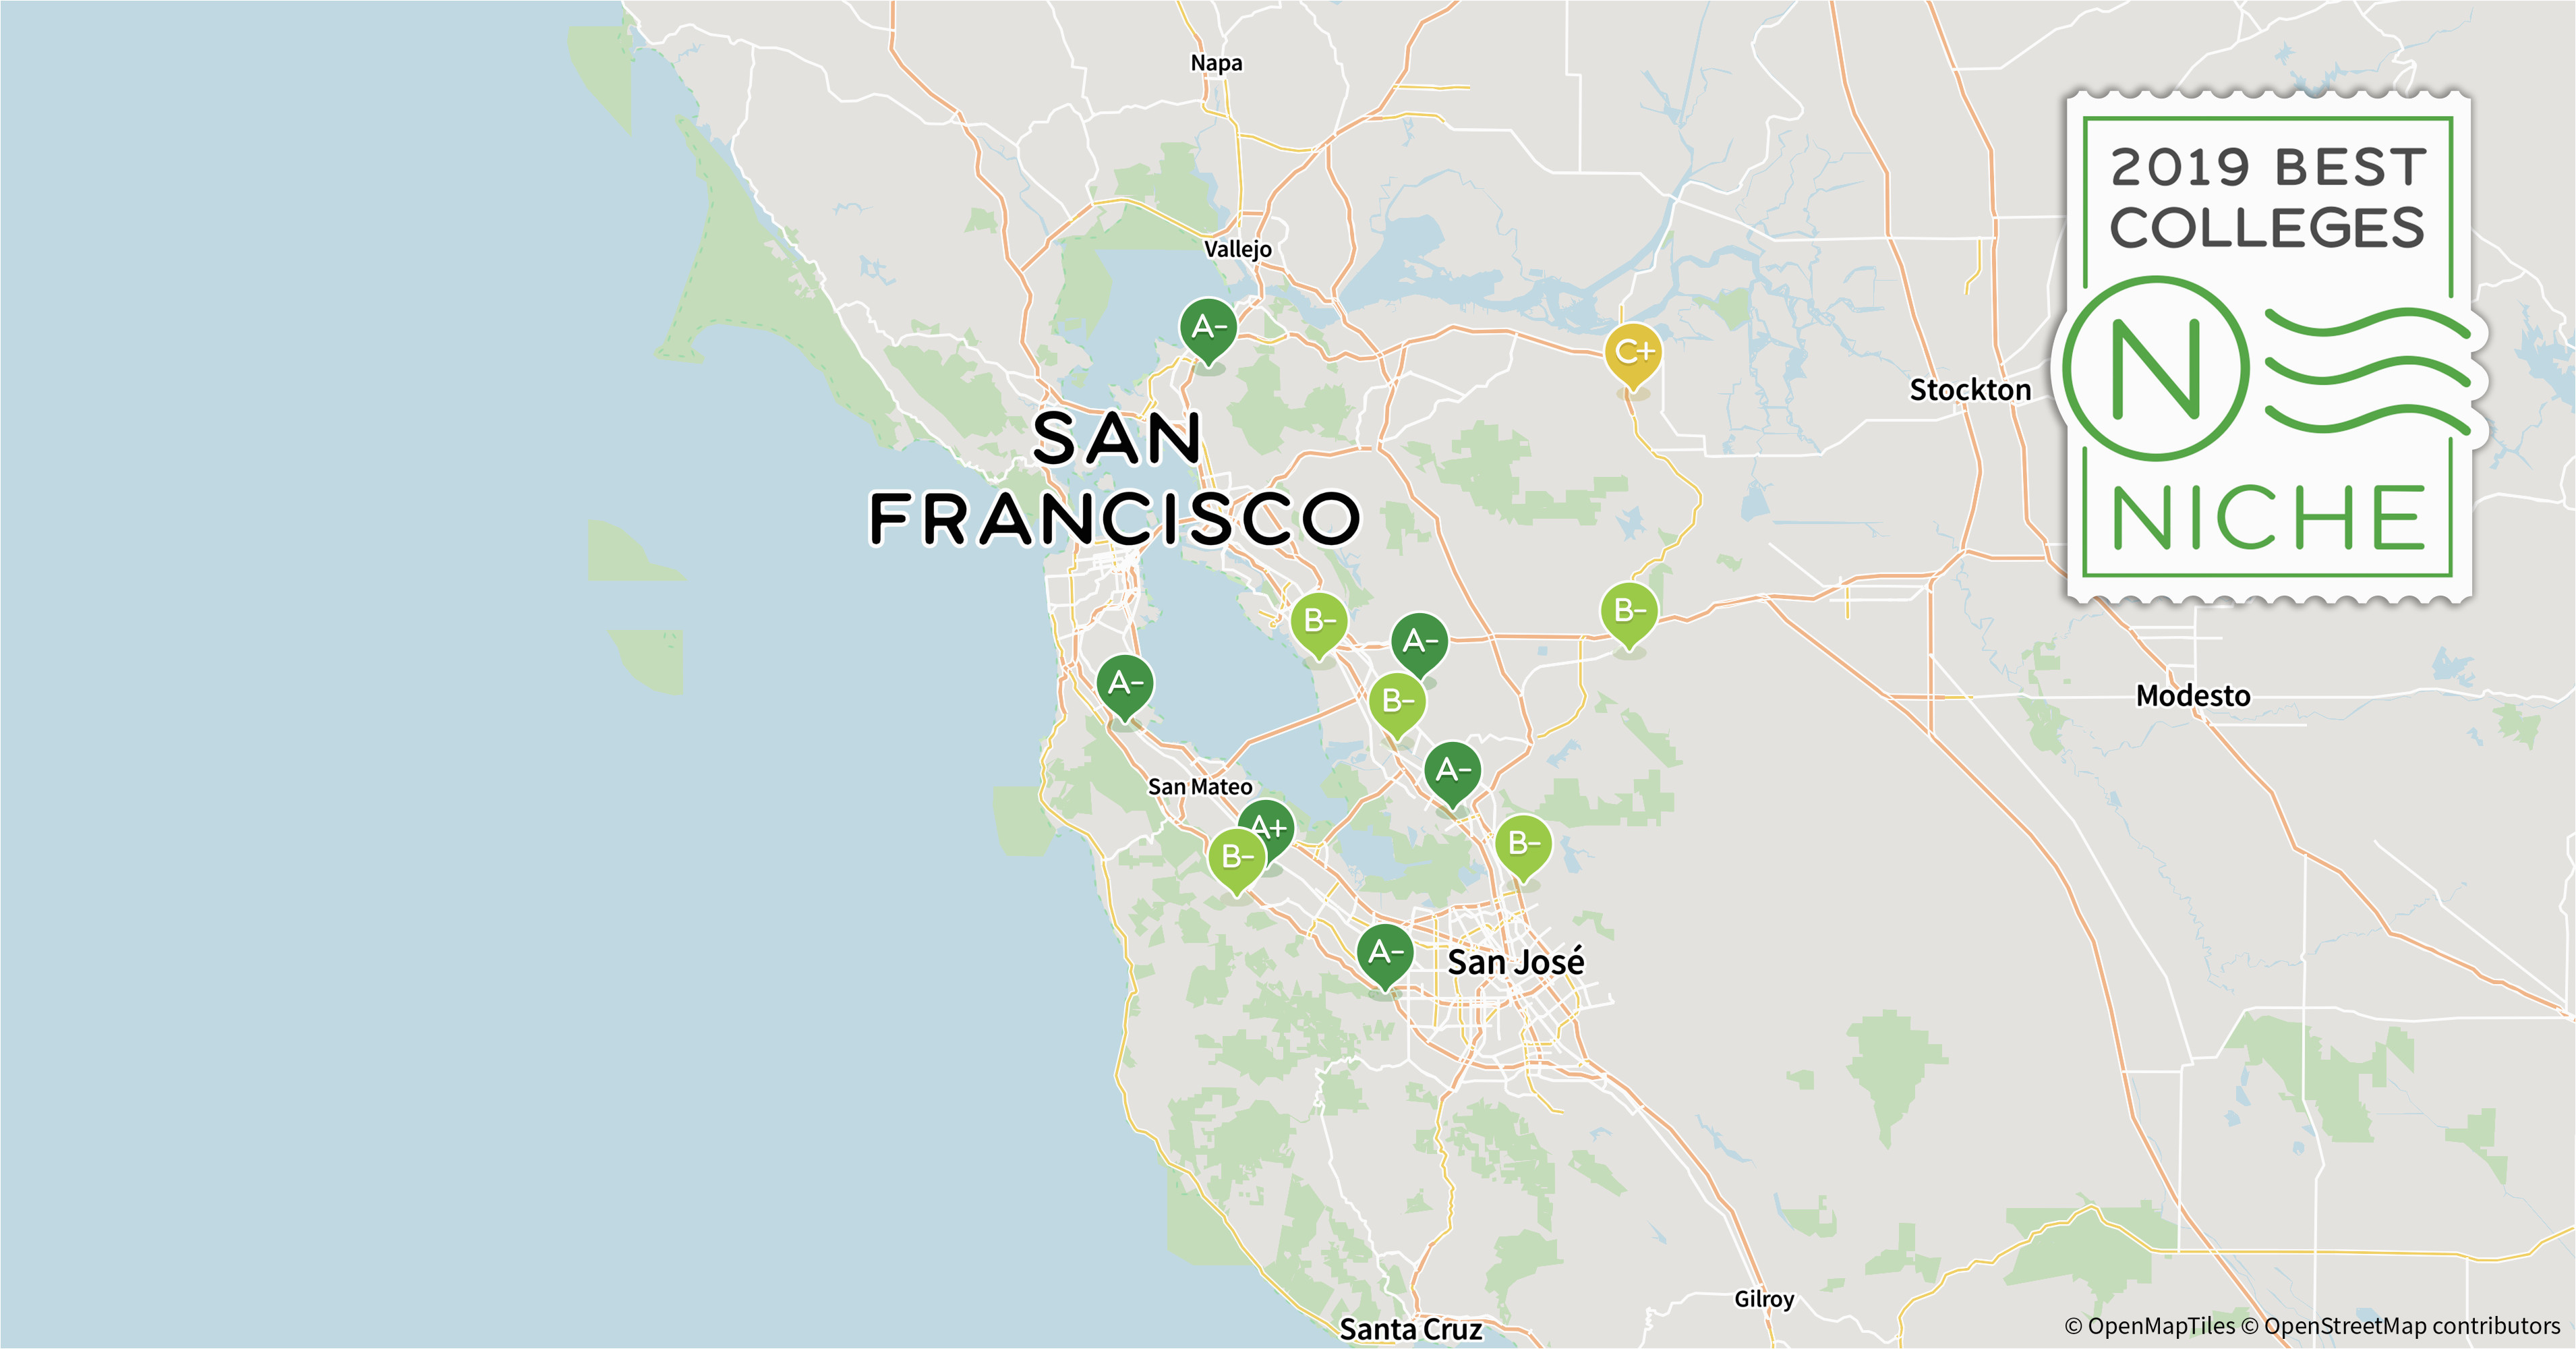 University Of California Campuses Map 2019 Best Colleges In San Francisco Bay area Niche